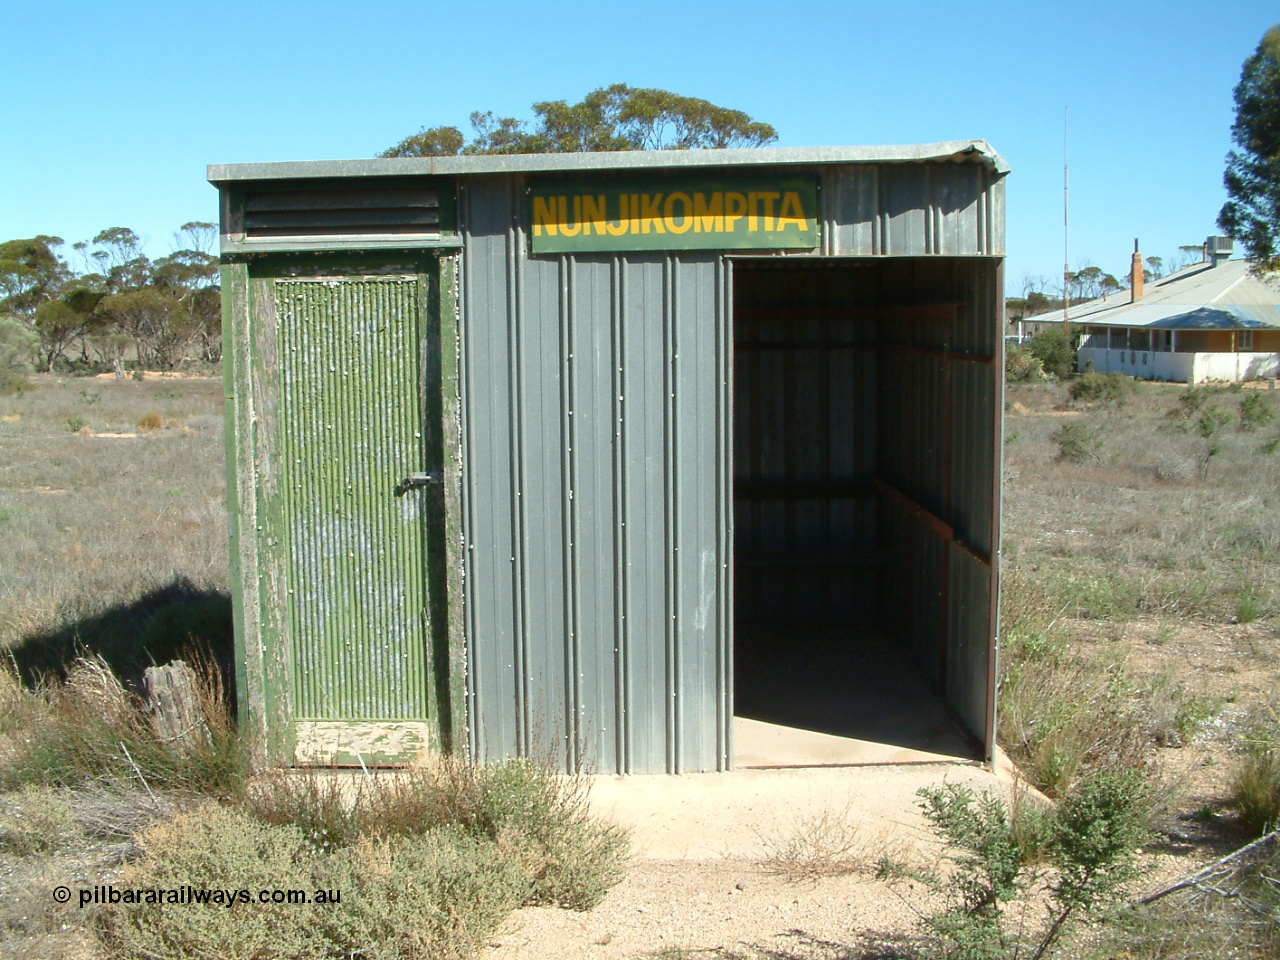 030411 141404
Nunjikompita, front view of 'station' shelter shed, the door on the left used to house the control telephone.
